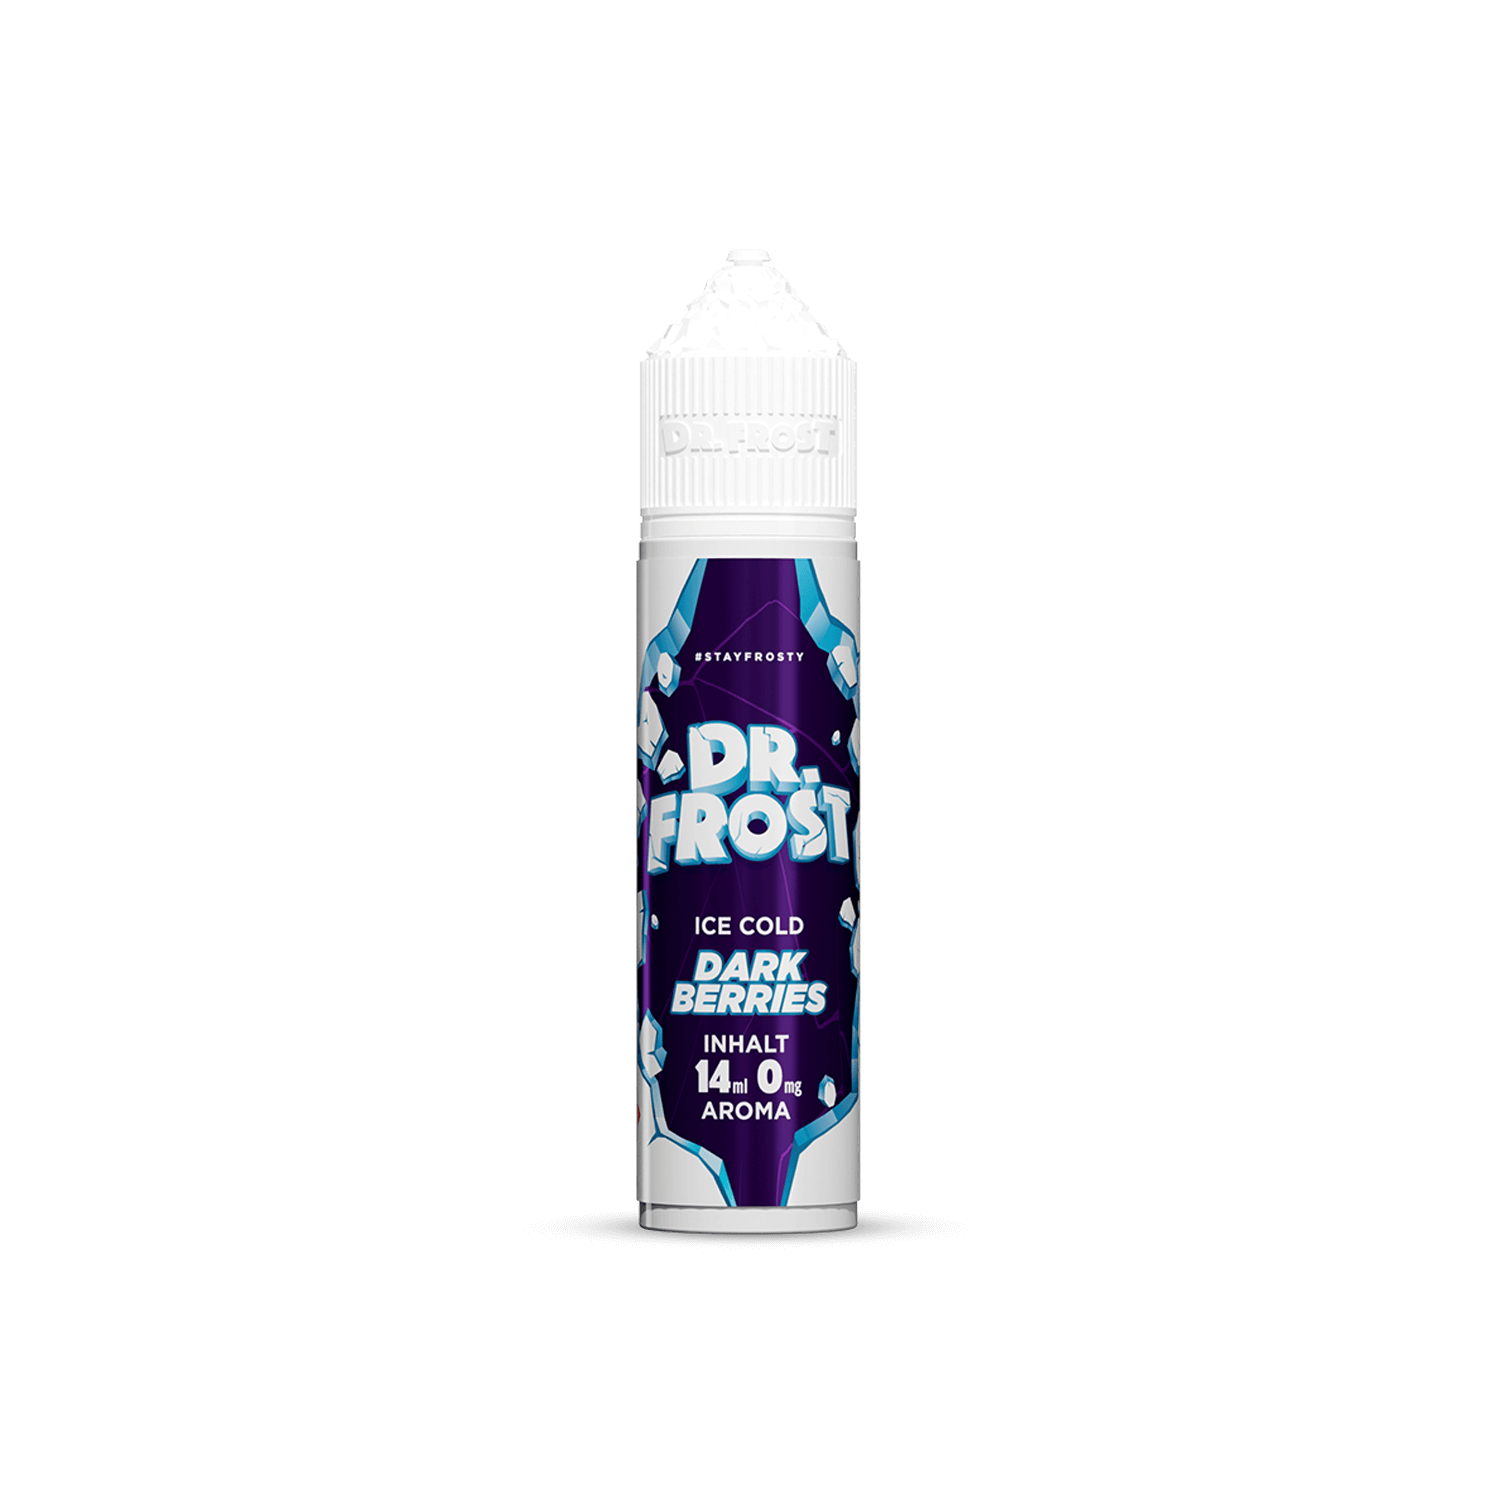 Dr. Frost - Ice Cold - Dark Berries 14ml Aroma